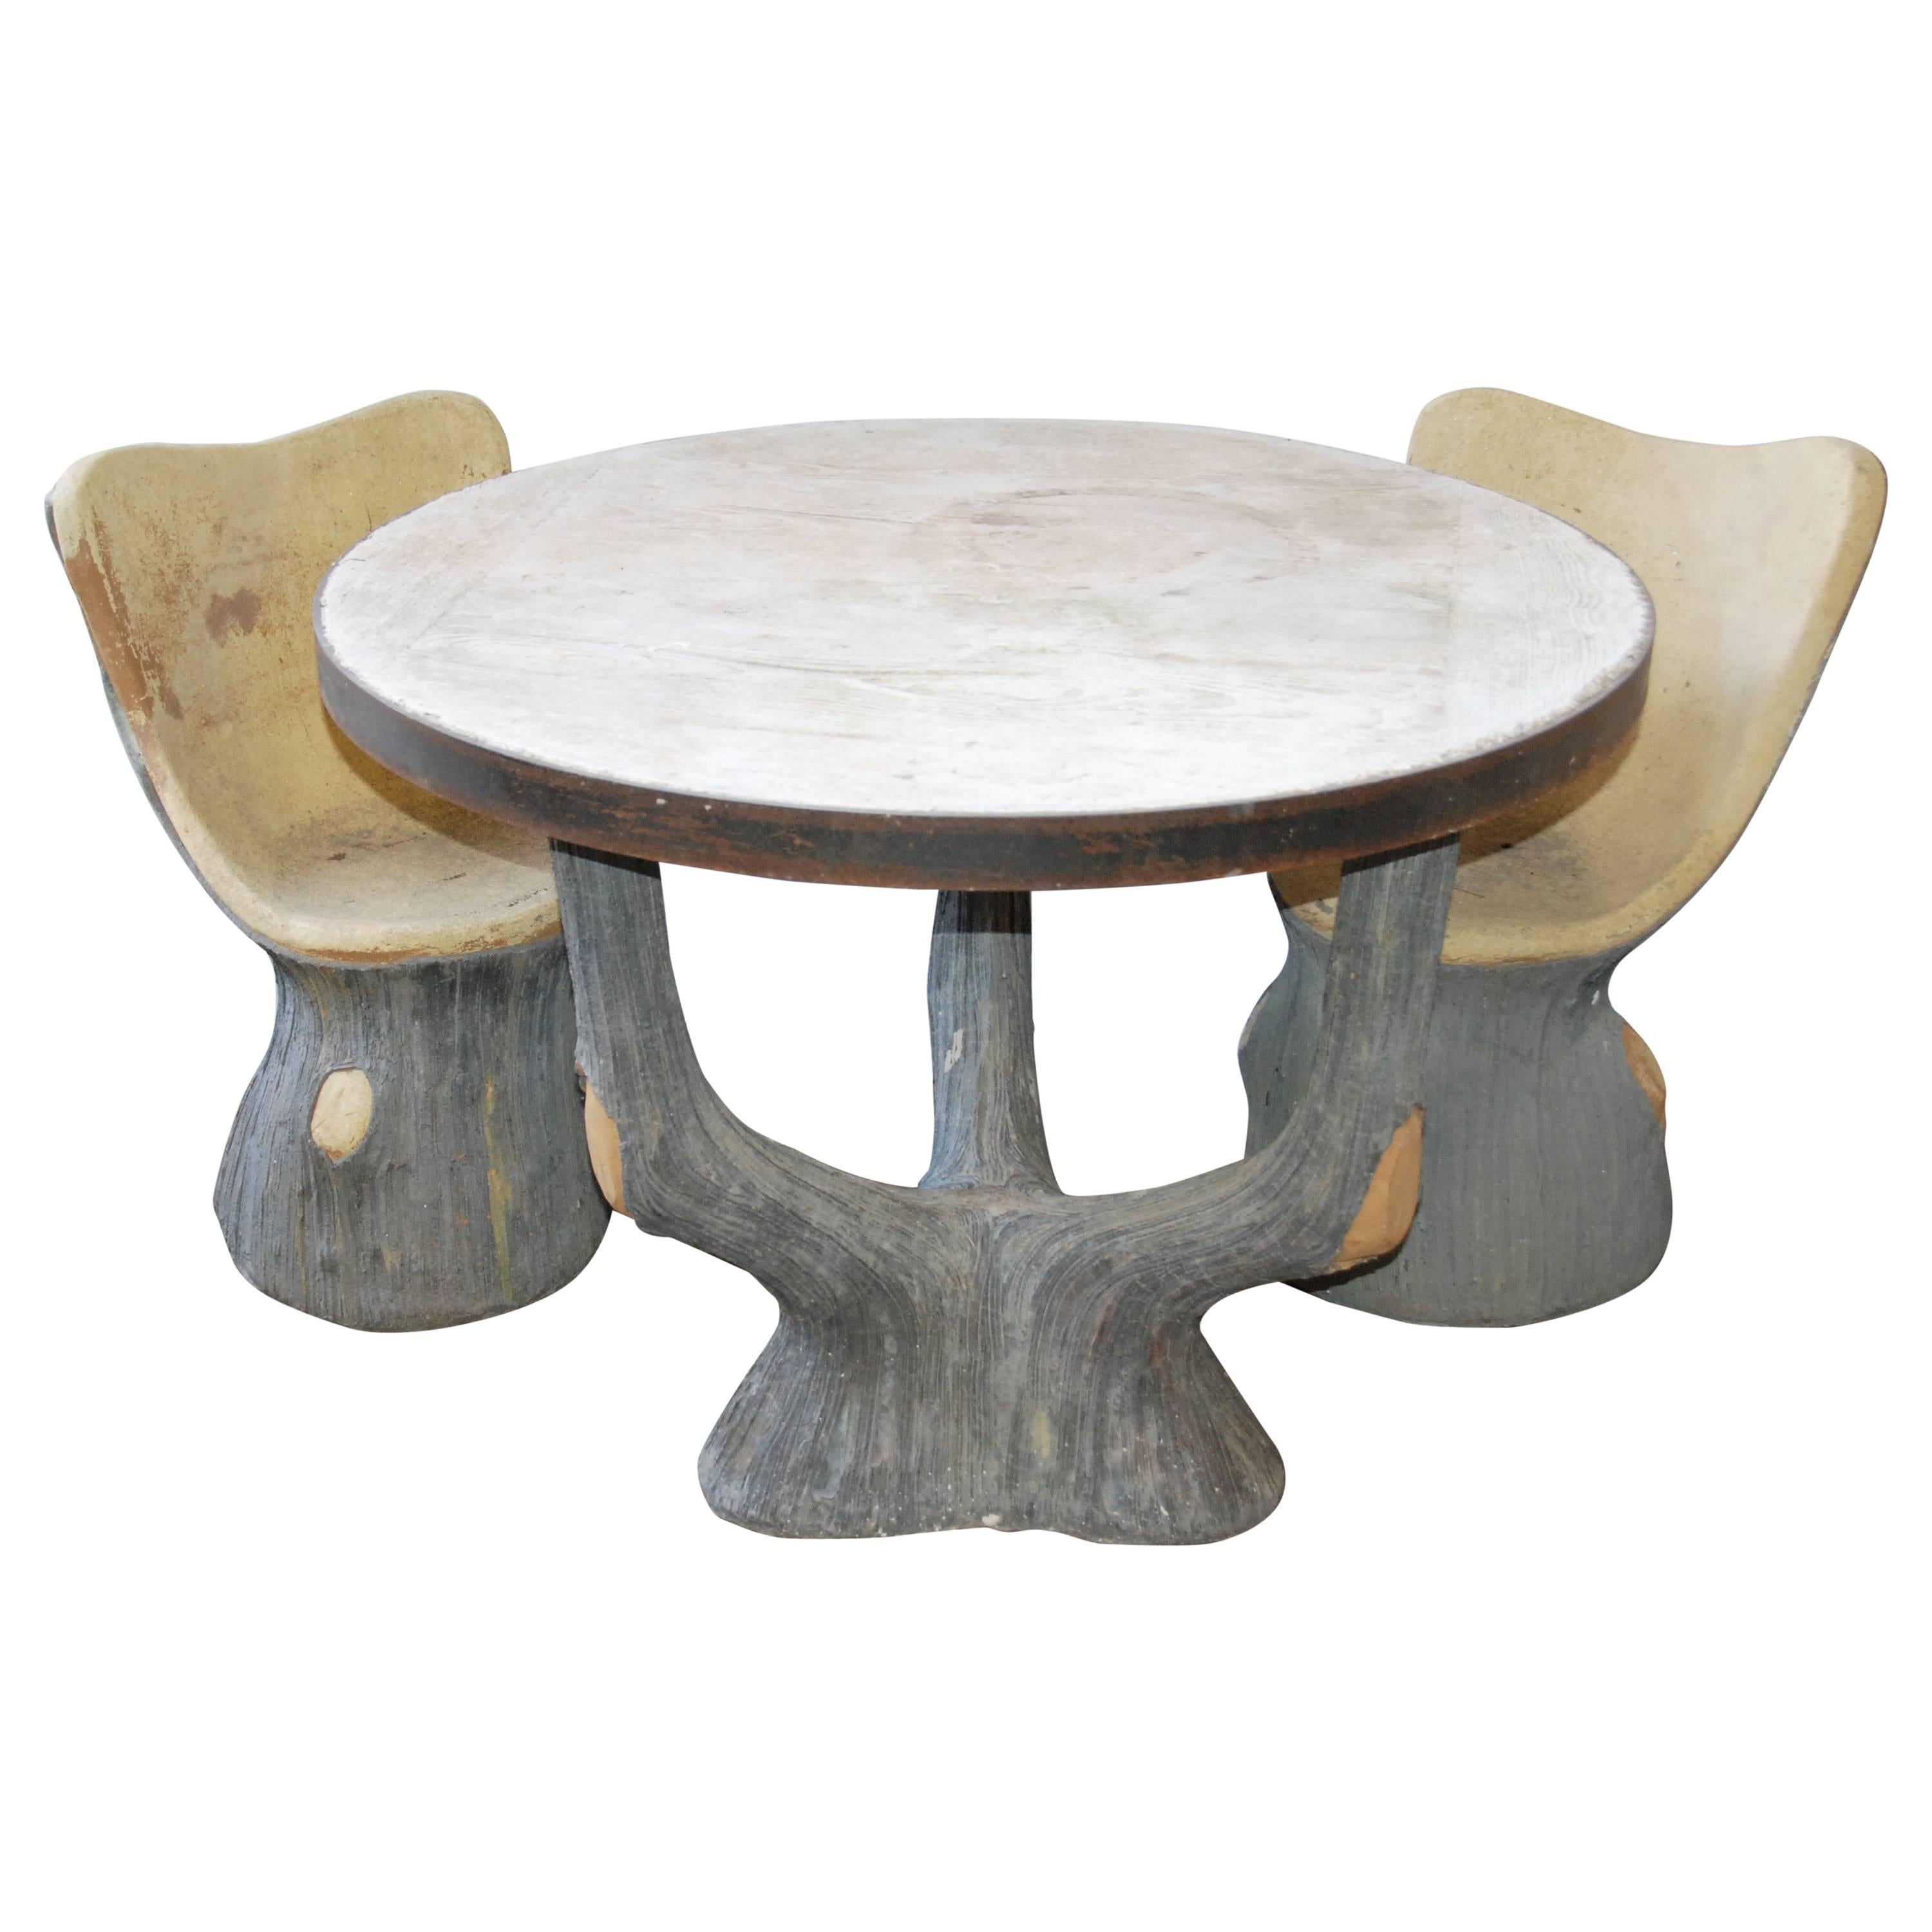 French Faux Bois Garden Table and Chairs For Sale